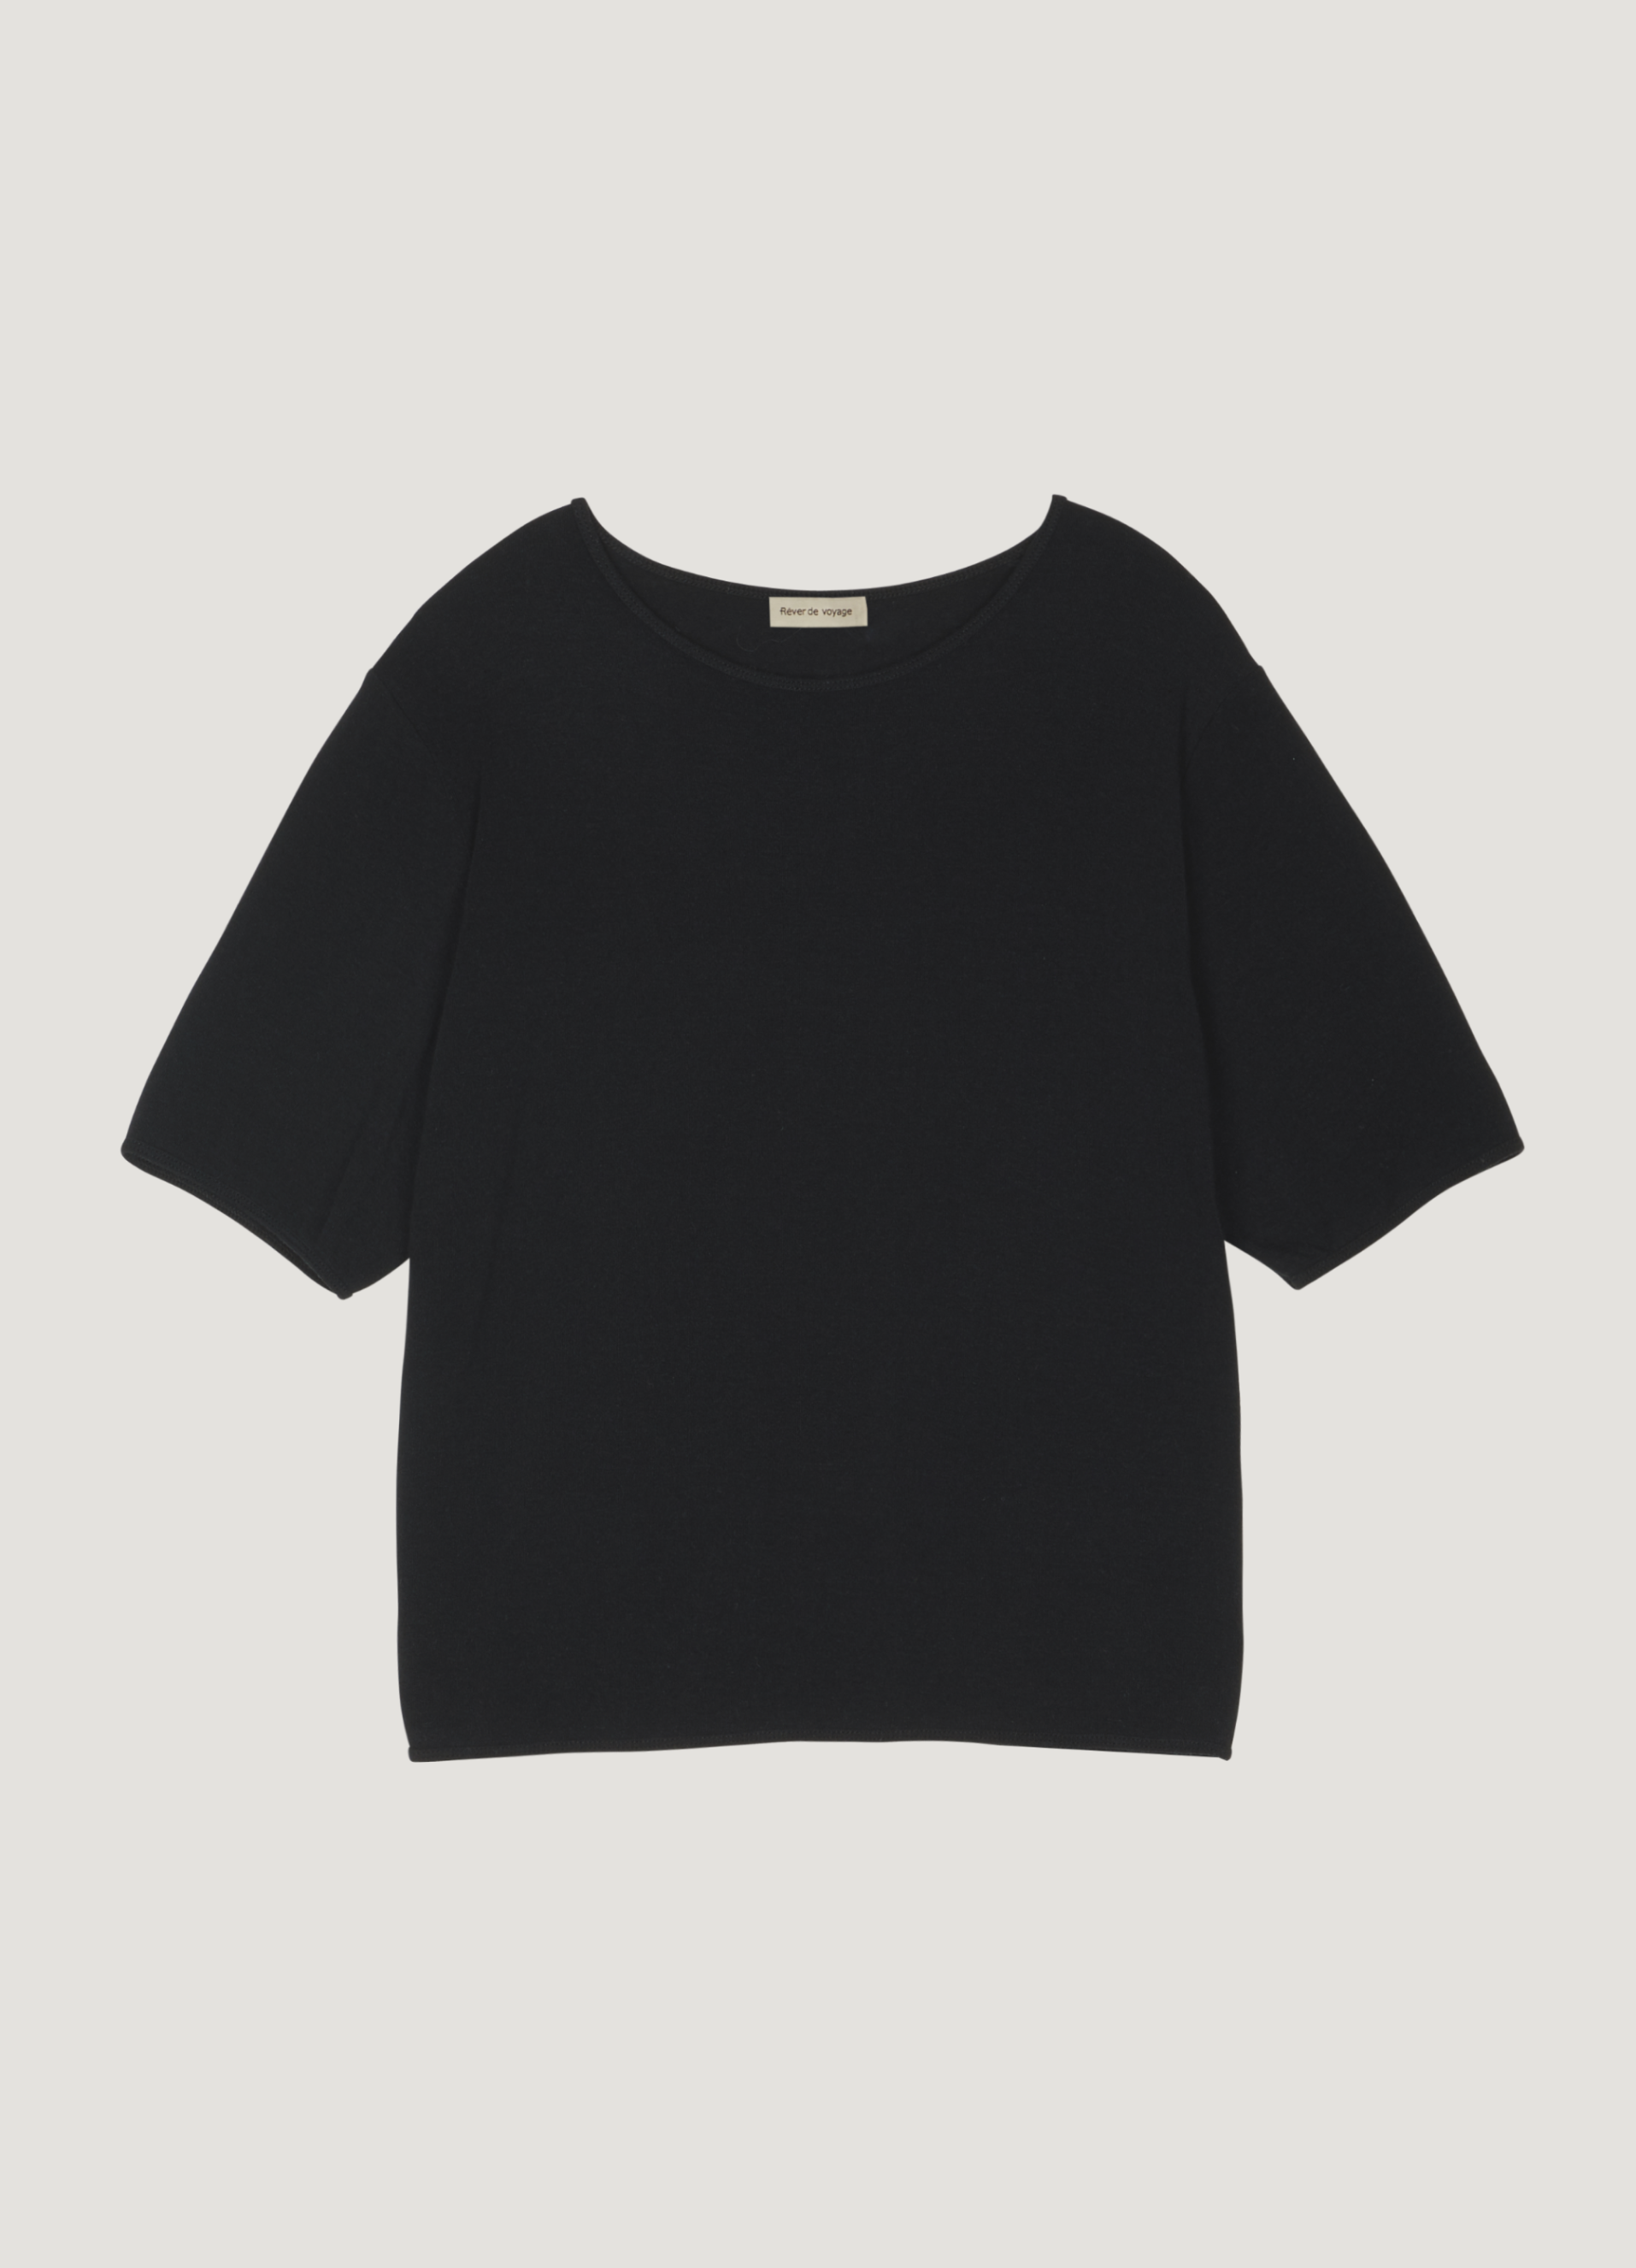 Bulky Wool Span T-shirt (Black) out of stock